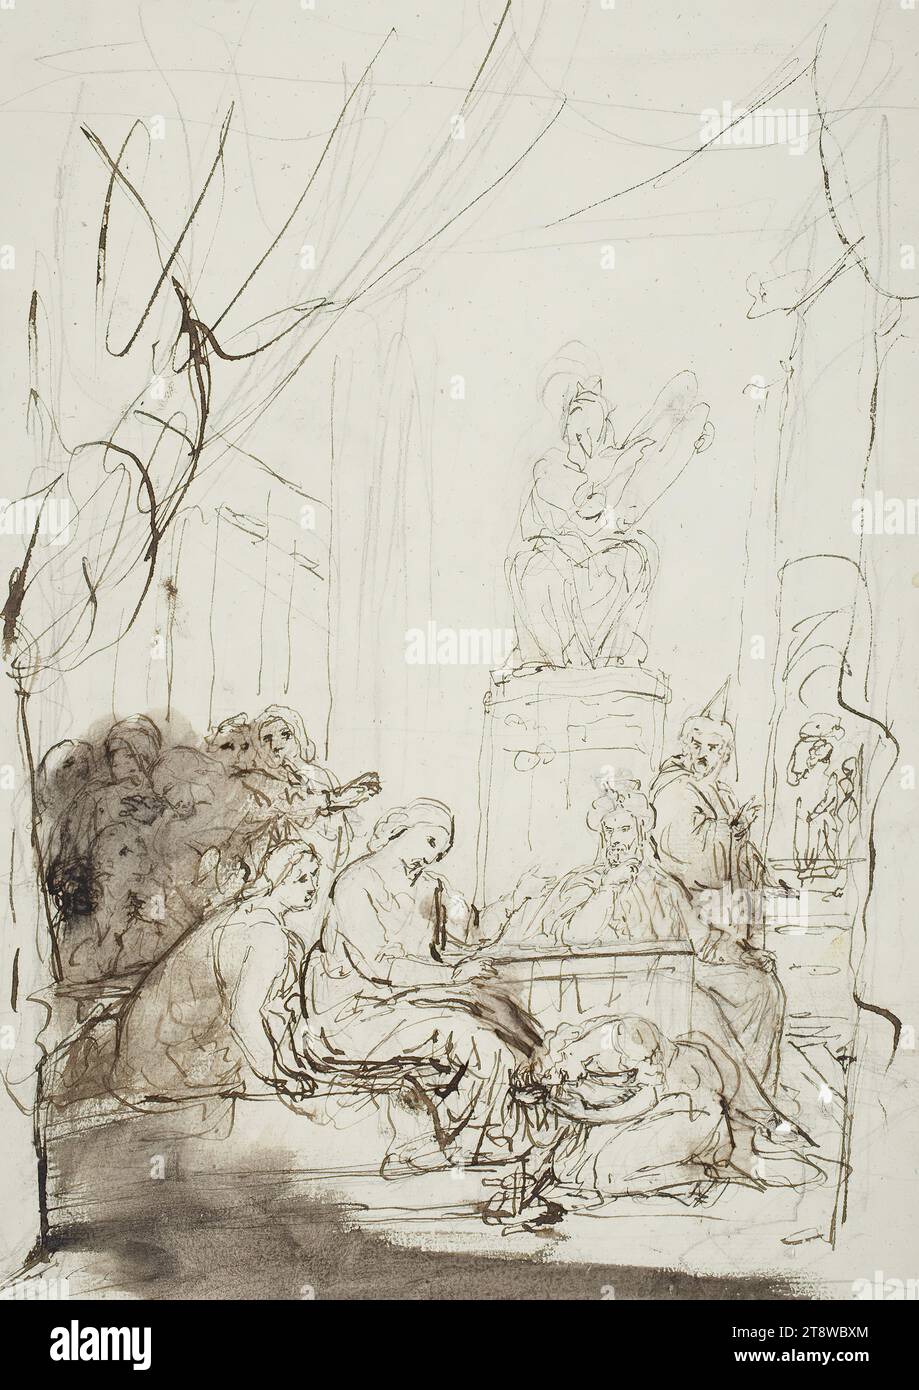 Robert Wilhelm Ekman, 13.8.1808, Uusikaupunki, 19.2.1873, Turku, A sinful woman is drying Christ's feet with her hair. Two Pharisees are sitting behind the woman. In the background a sculpture of Moses and the Law Tables., 33 × 22 cm Stock Photo